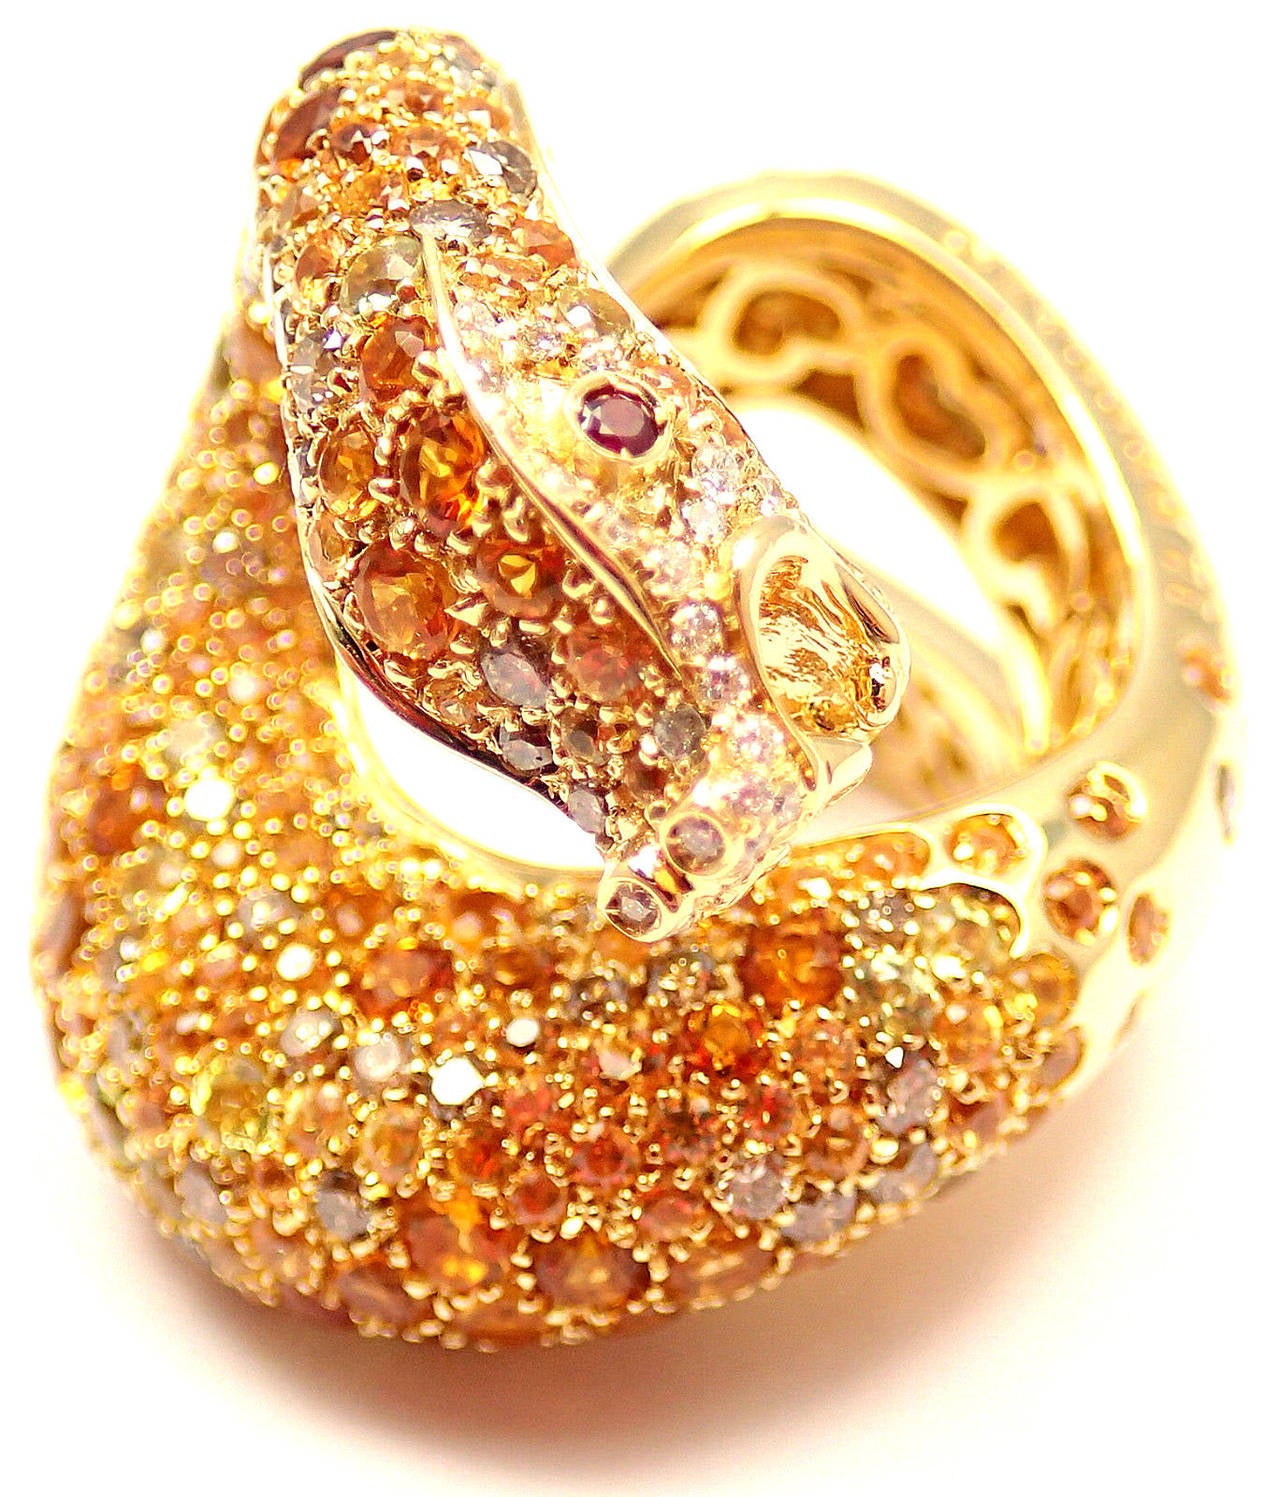 18k Yellow Gold IL PECCATO Sapphire Ruby Diamond Large nSnake Ring by 
Pasquale Bruni.
With Round Brilliant Cut Diamonds VS1 clarity, G color total weight 
approx. 2.01ct 
Sapphires 3.26ct.
Rubies: .05ct
This ring comes with Box, Certificate